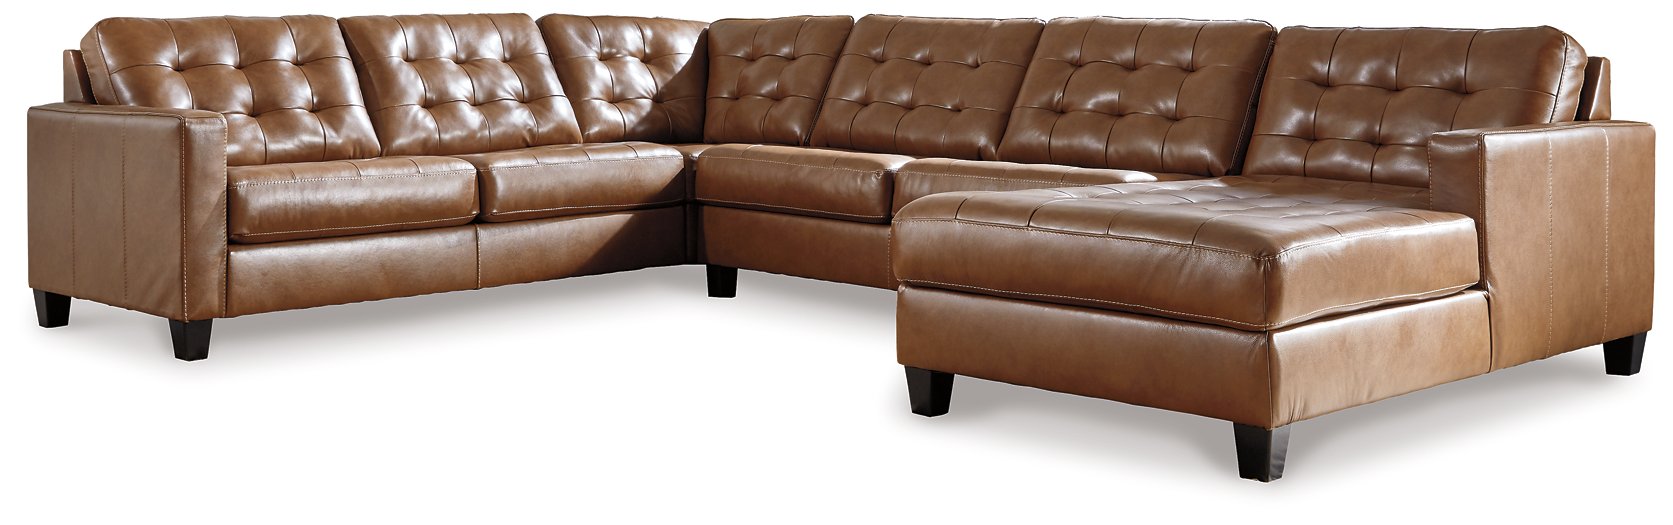 Baskove 4-Piece Sectional with Chaise